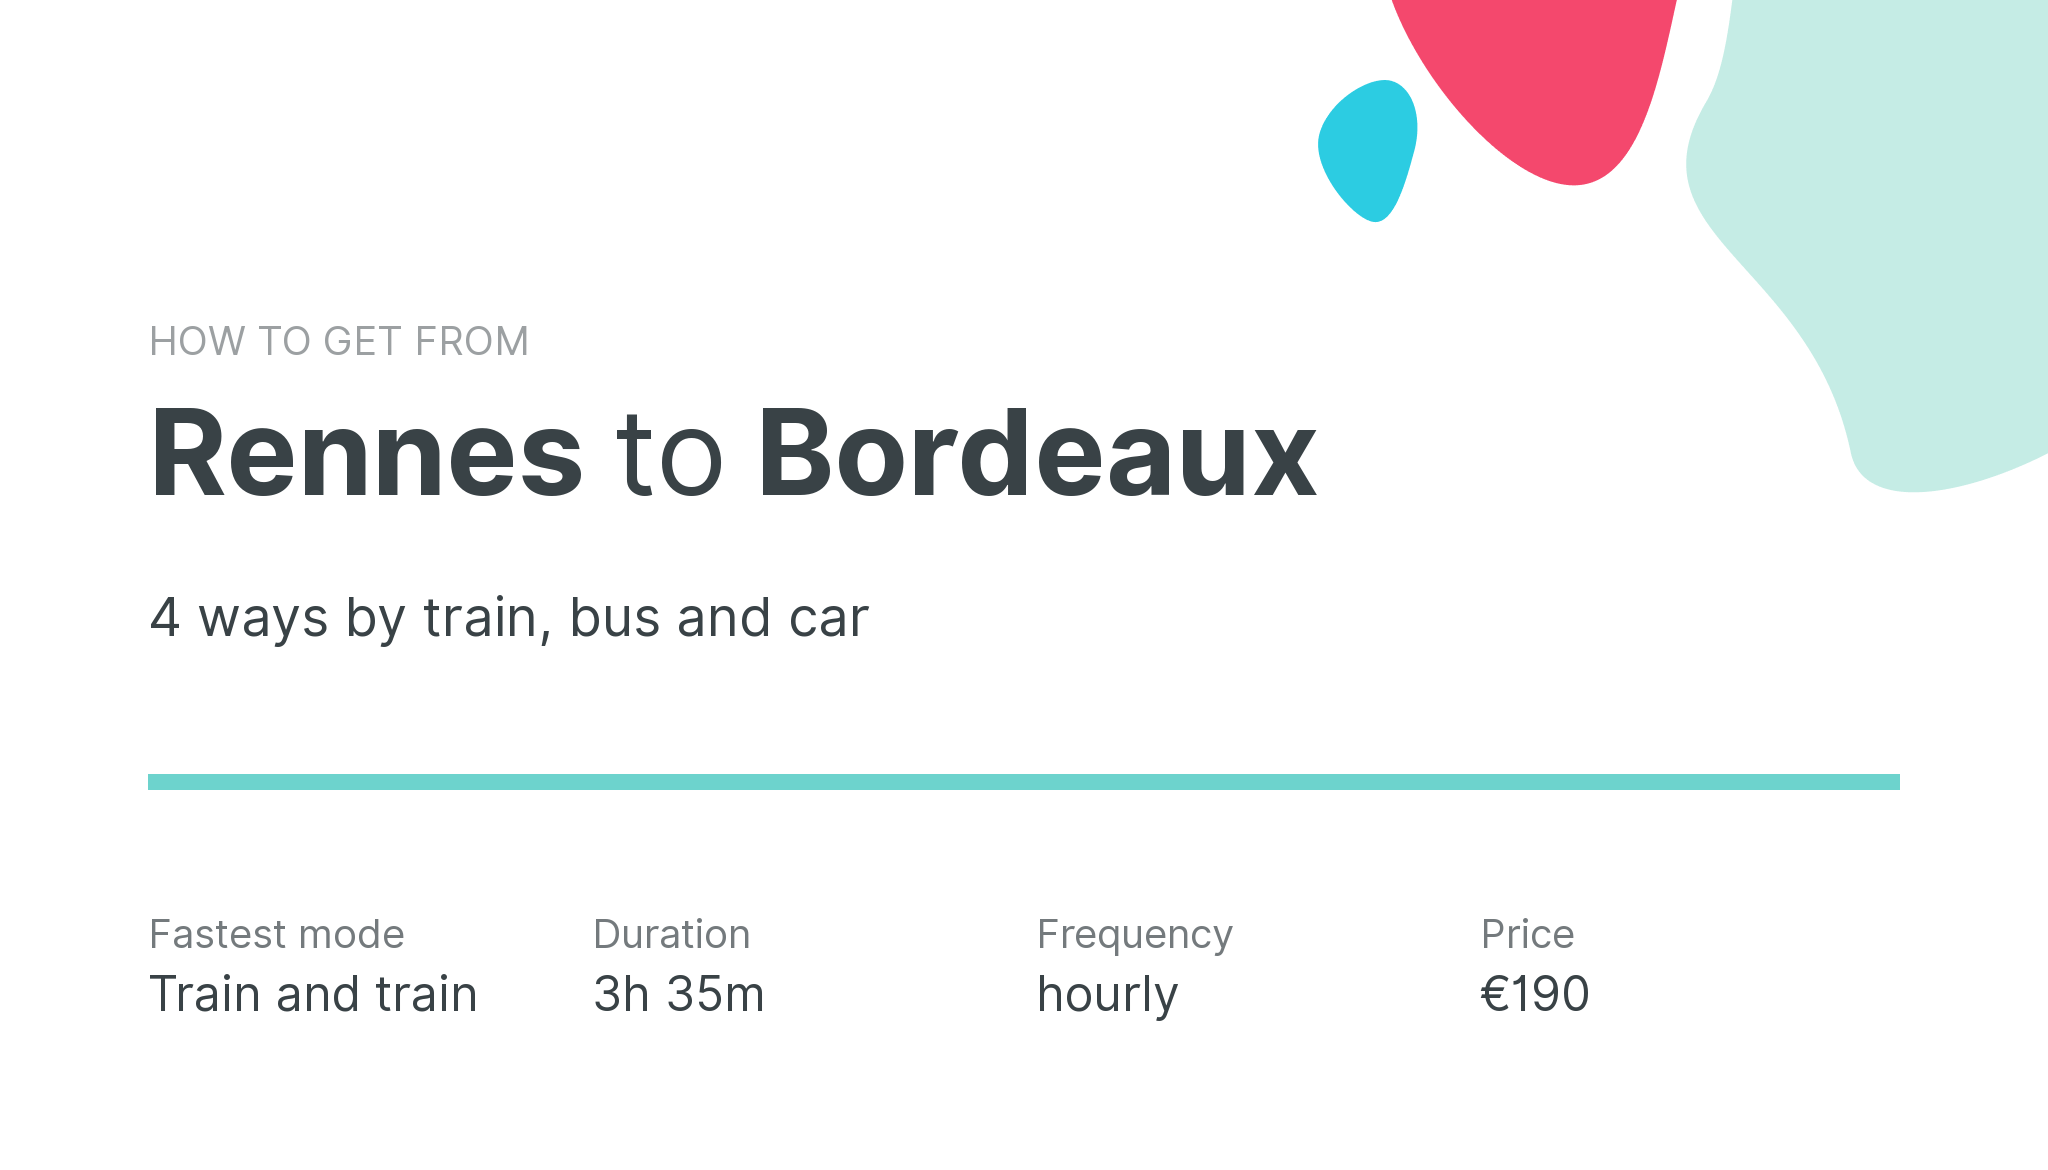 How do I get from Rennes to Bordeaux